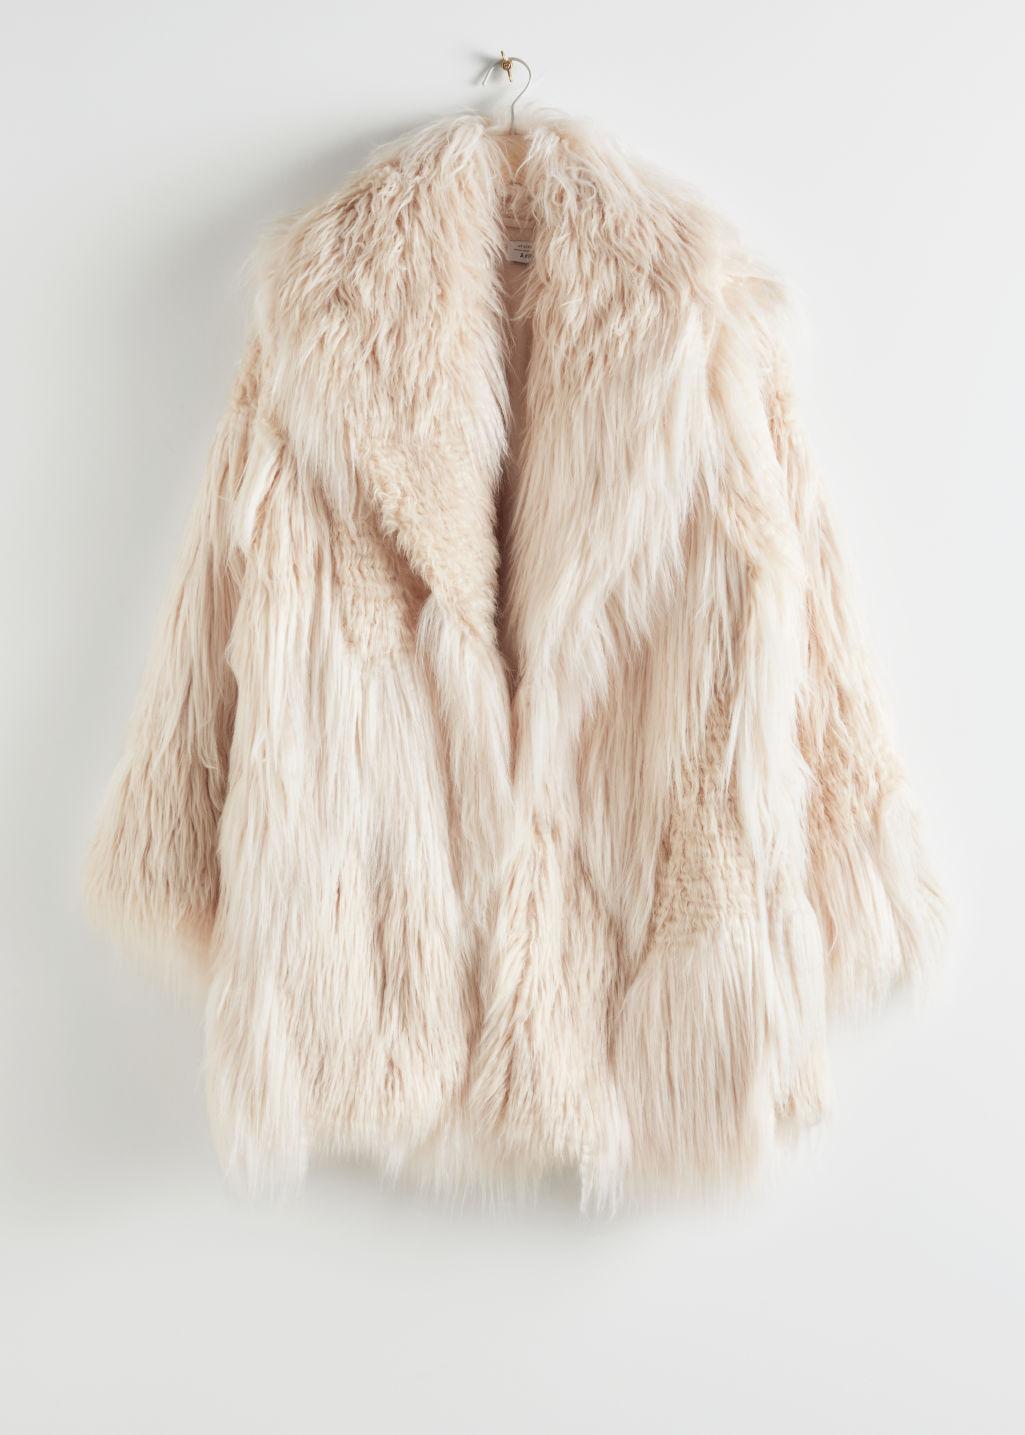 & Other Stories Oversized Shaggy Faux Fur Coat in White | Lyst